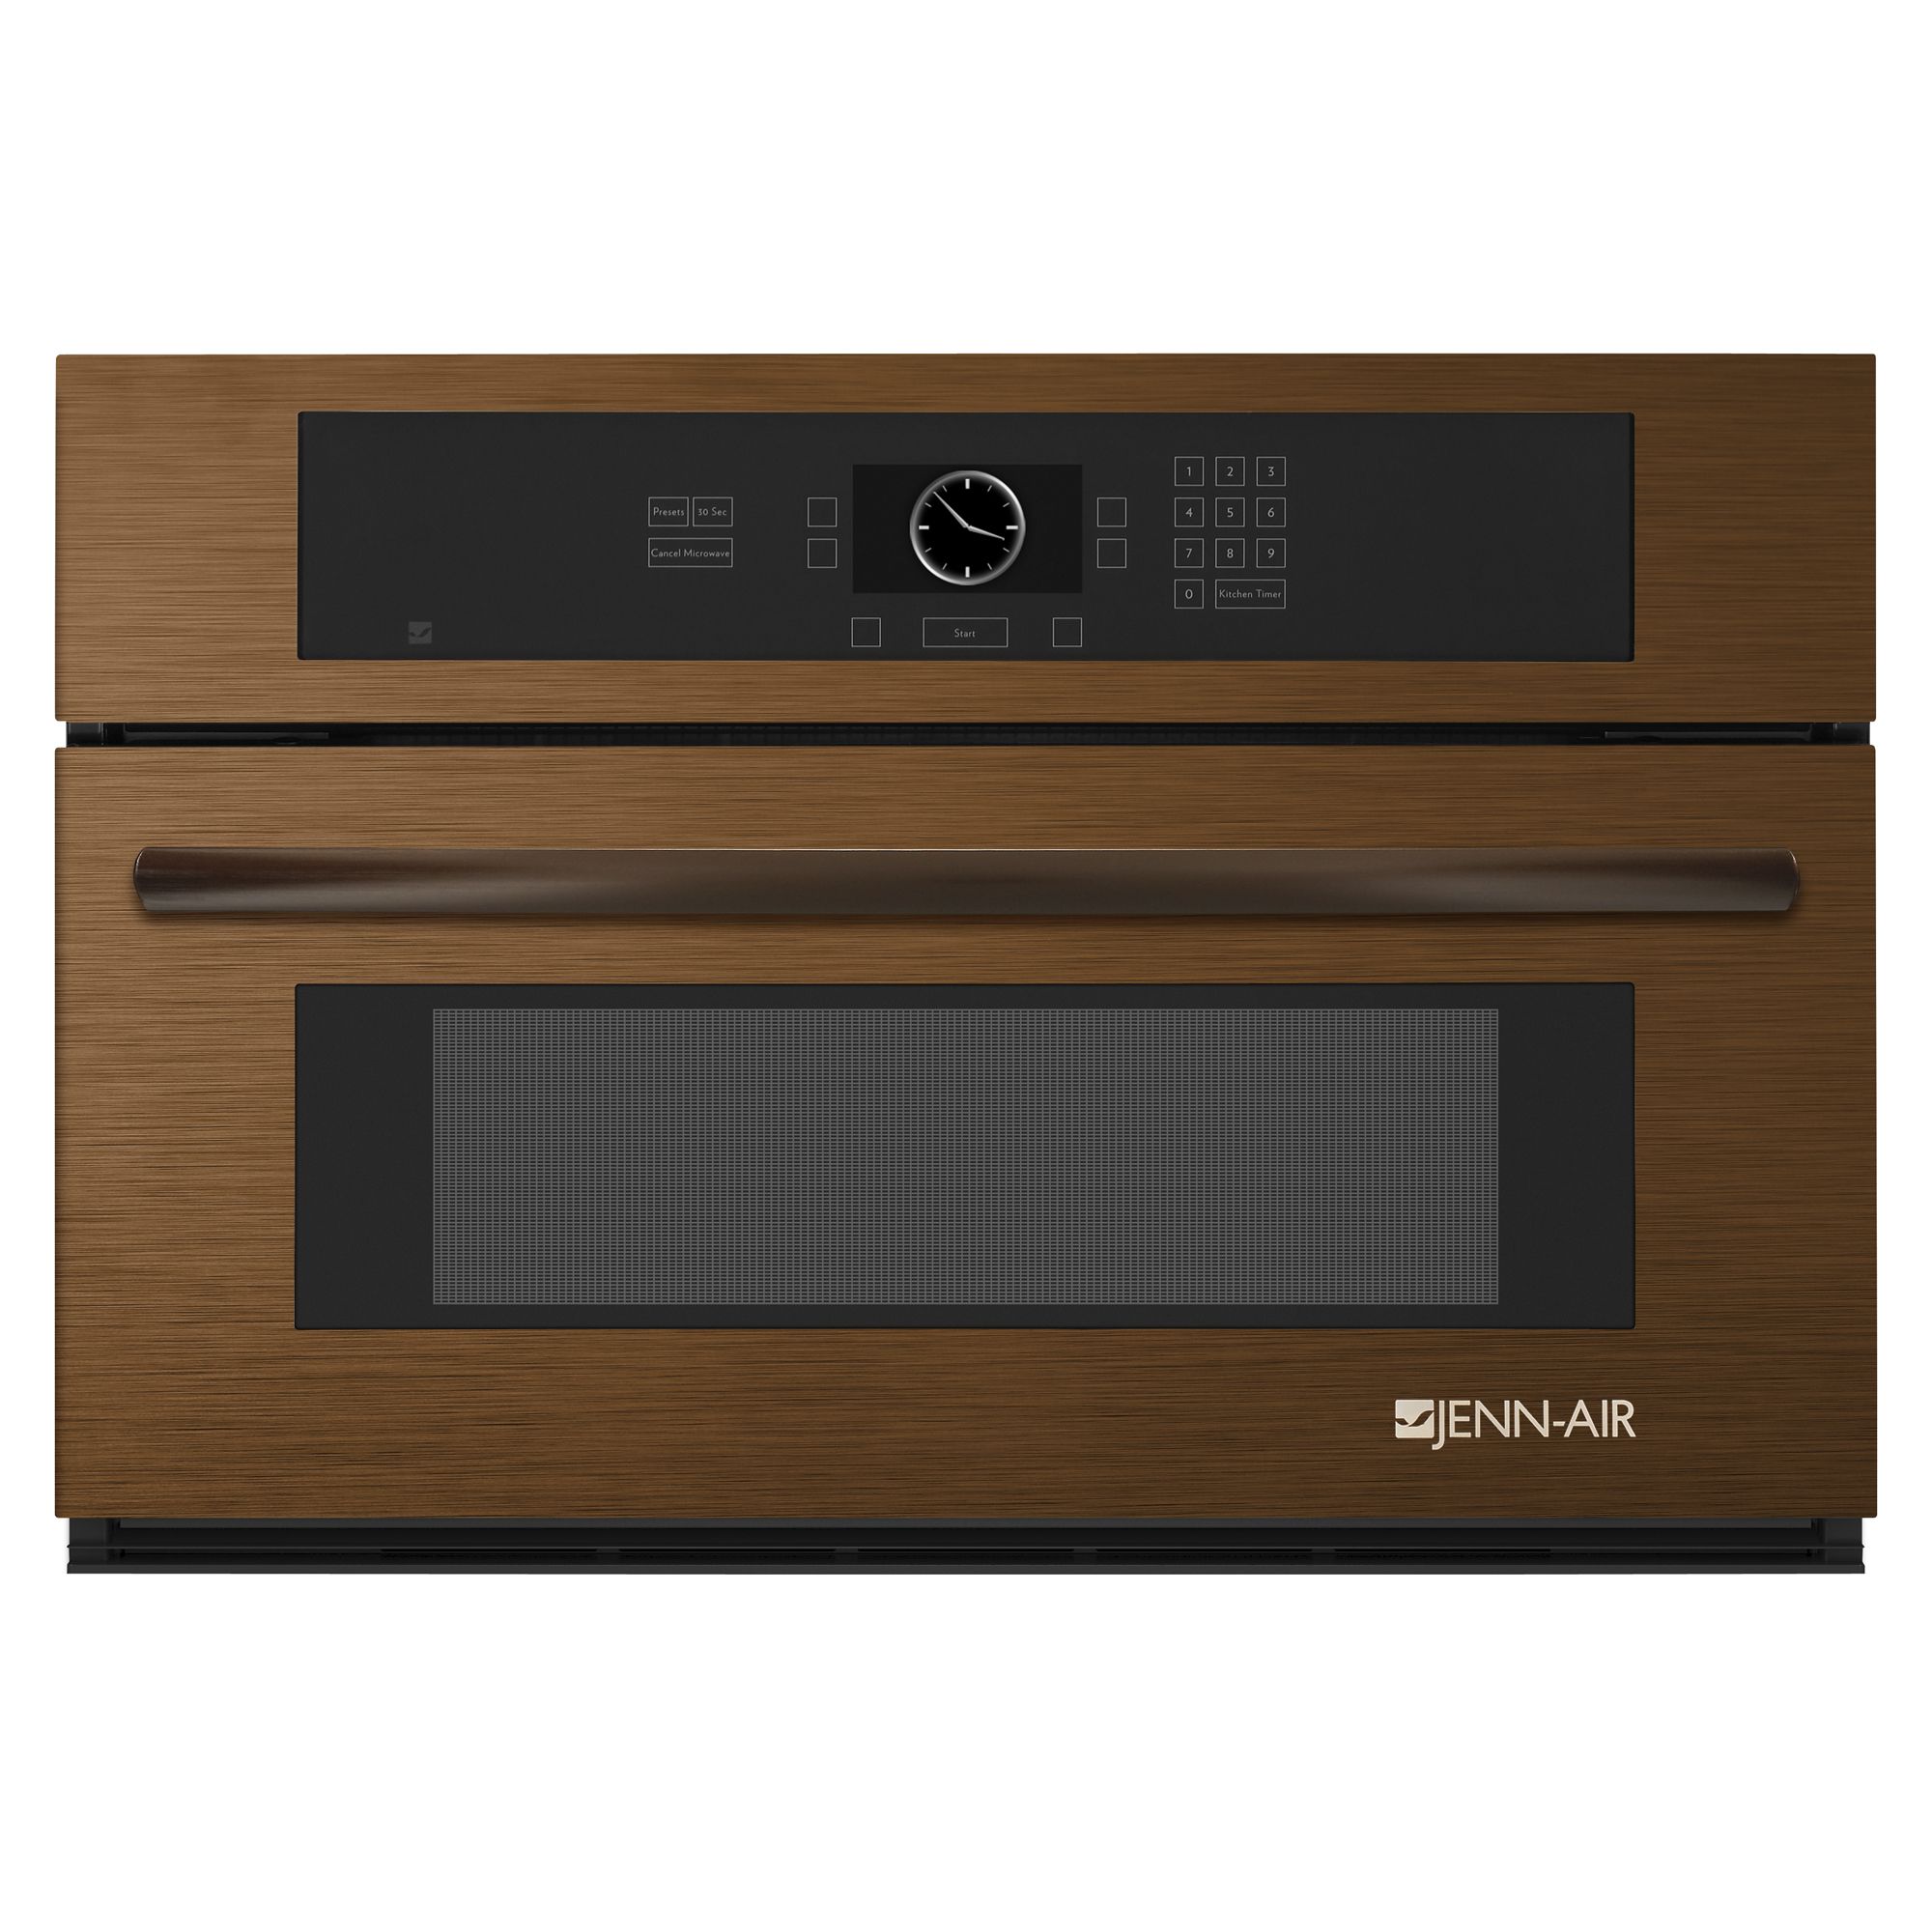 30" Built-In Convection Microwave logo